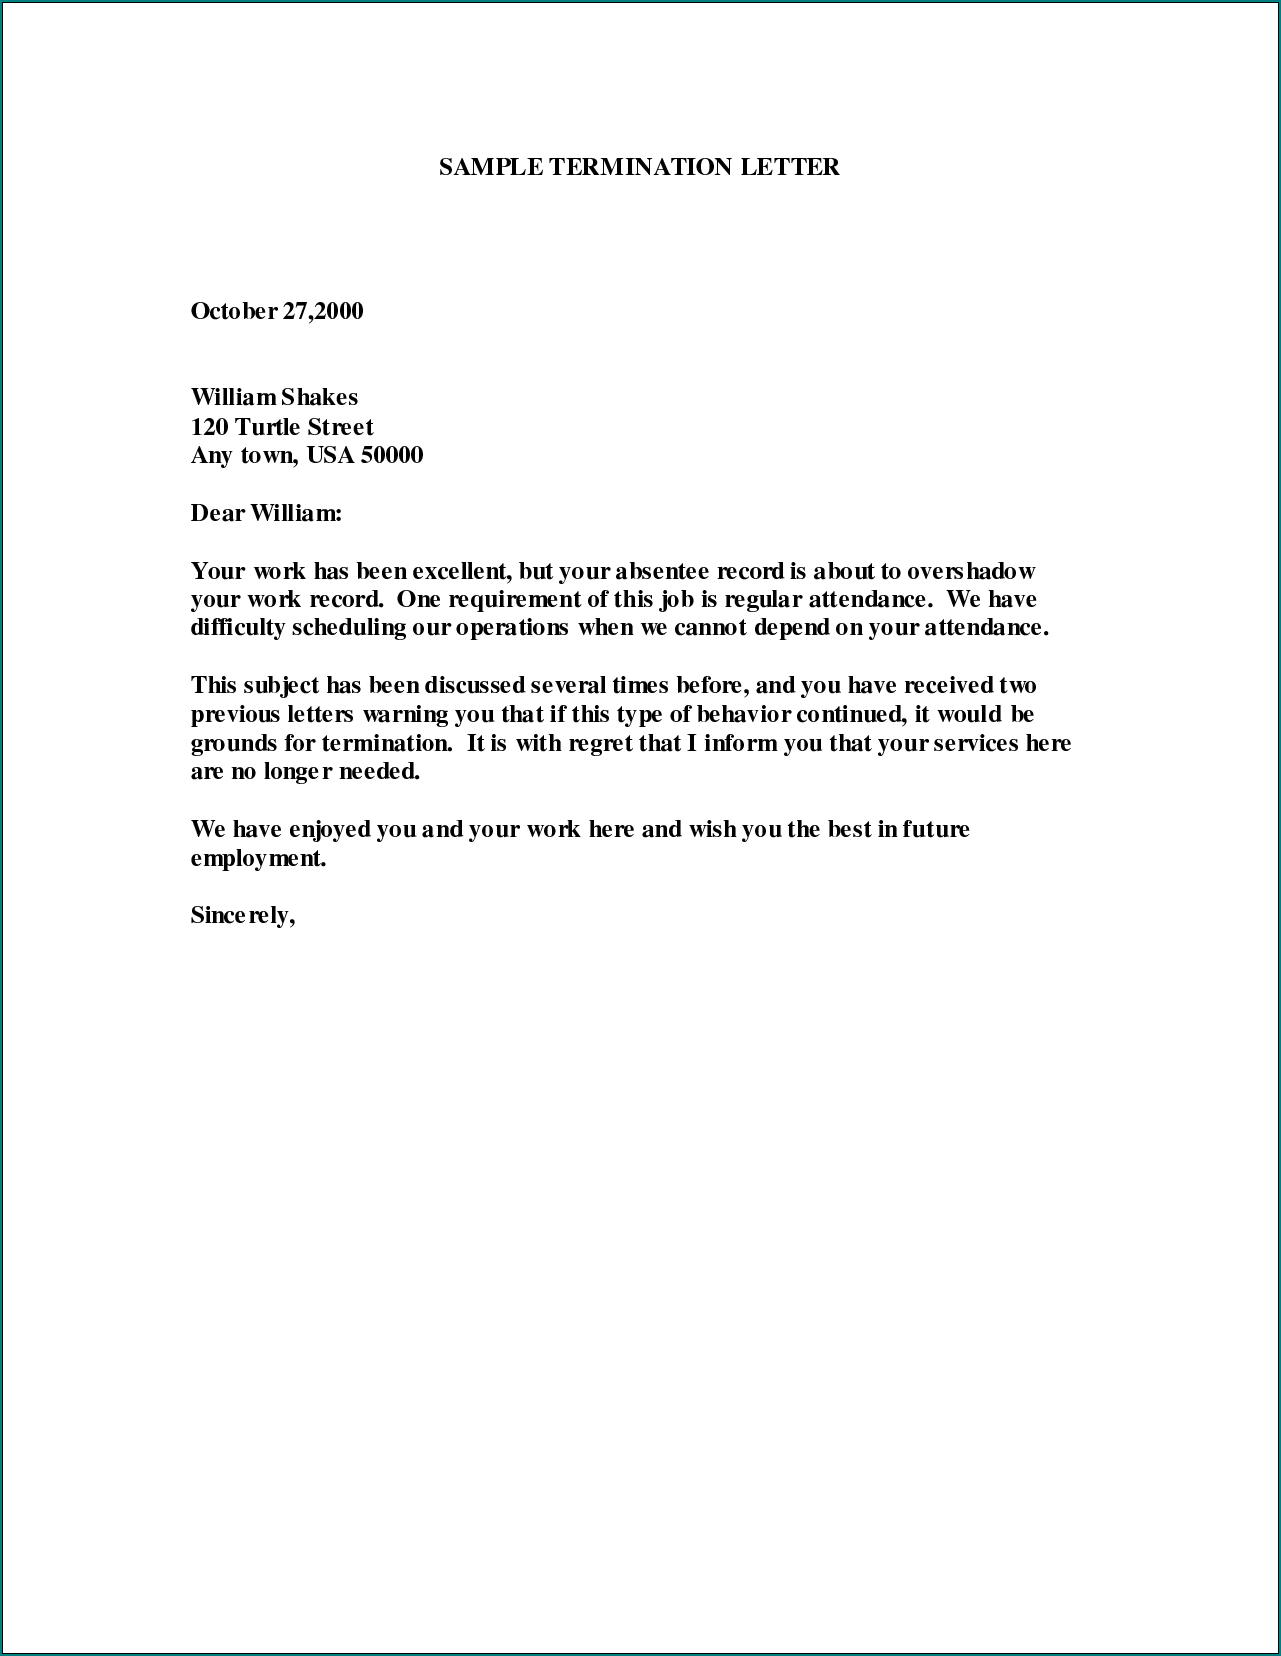 Sample of Termination Letter Template